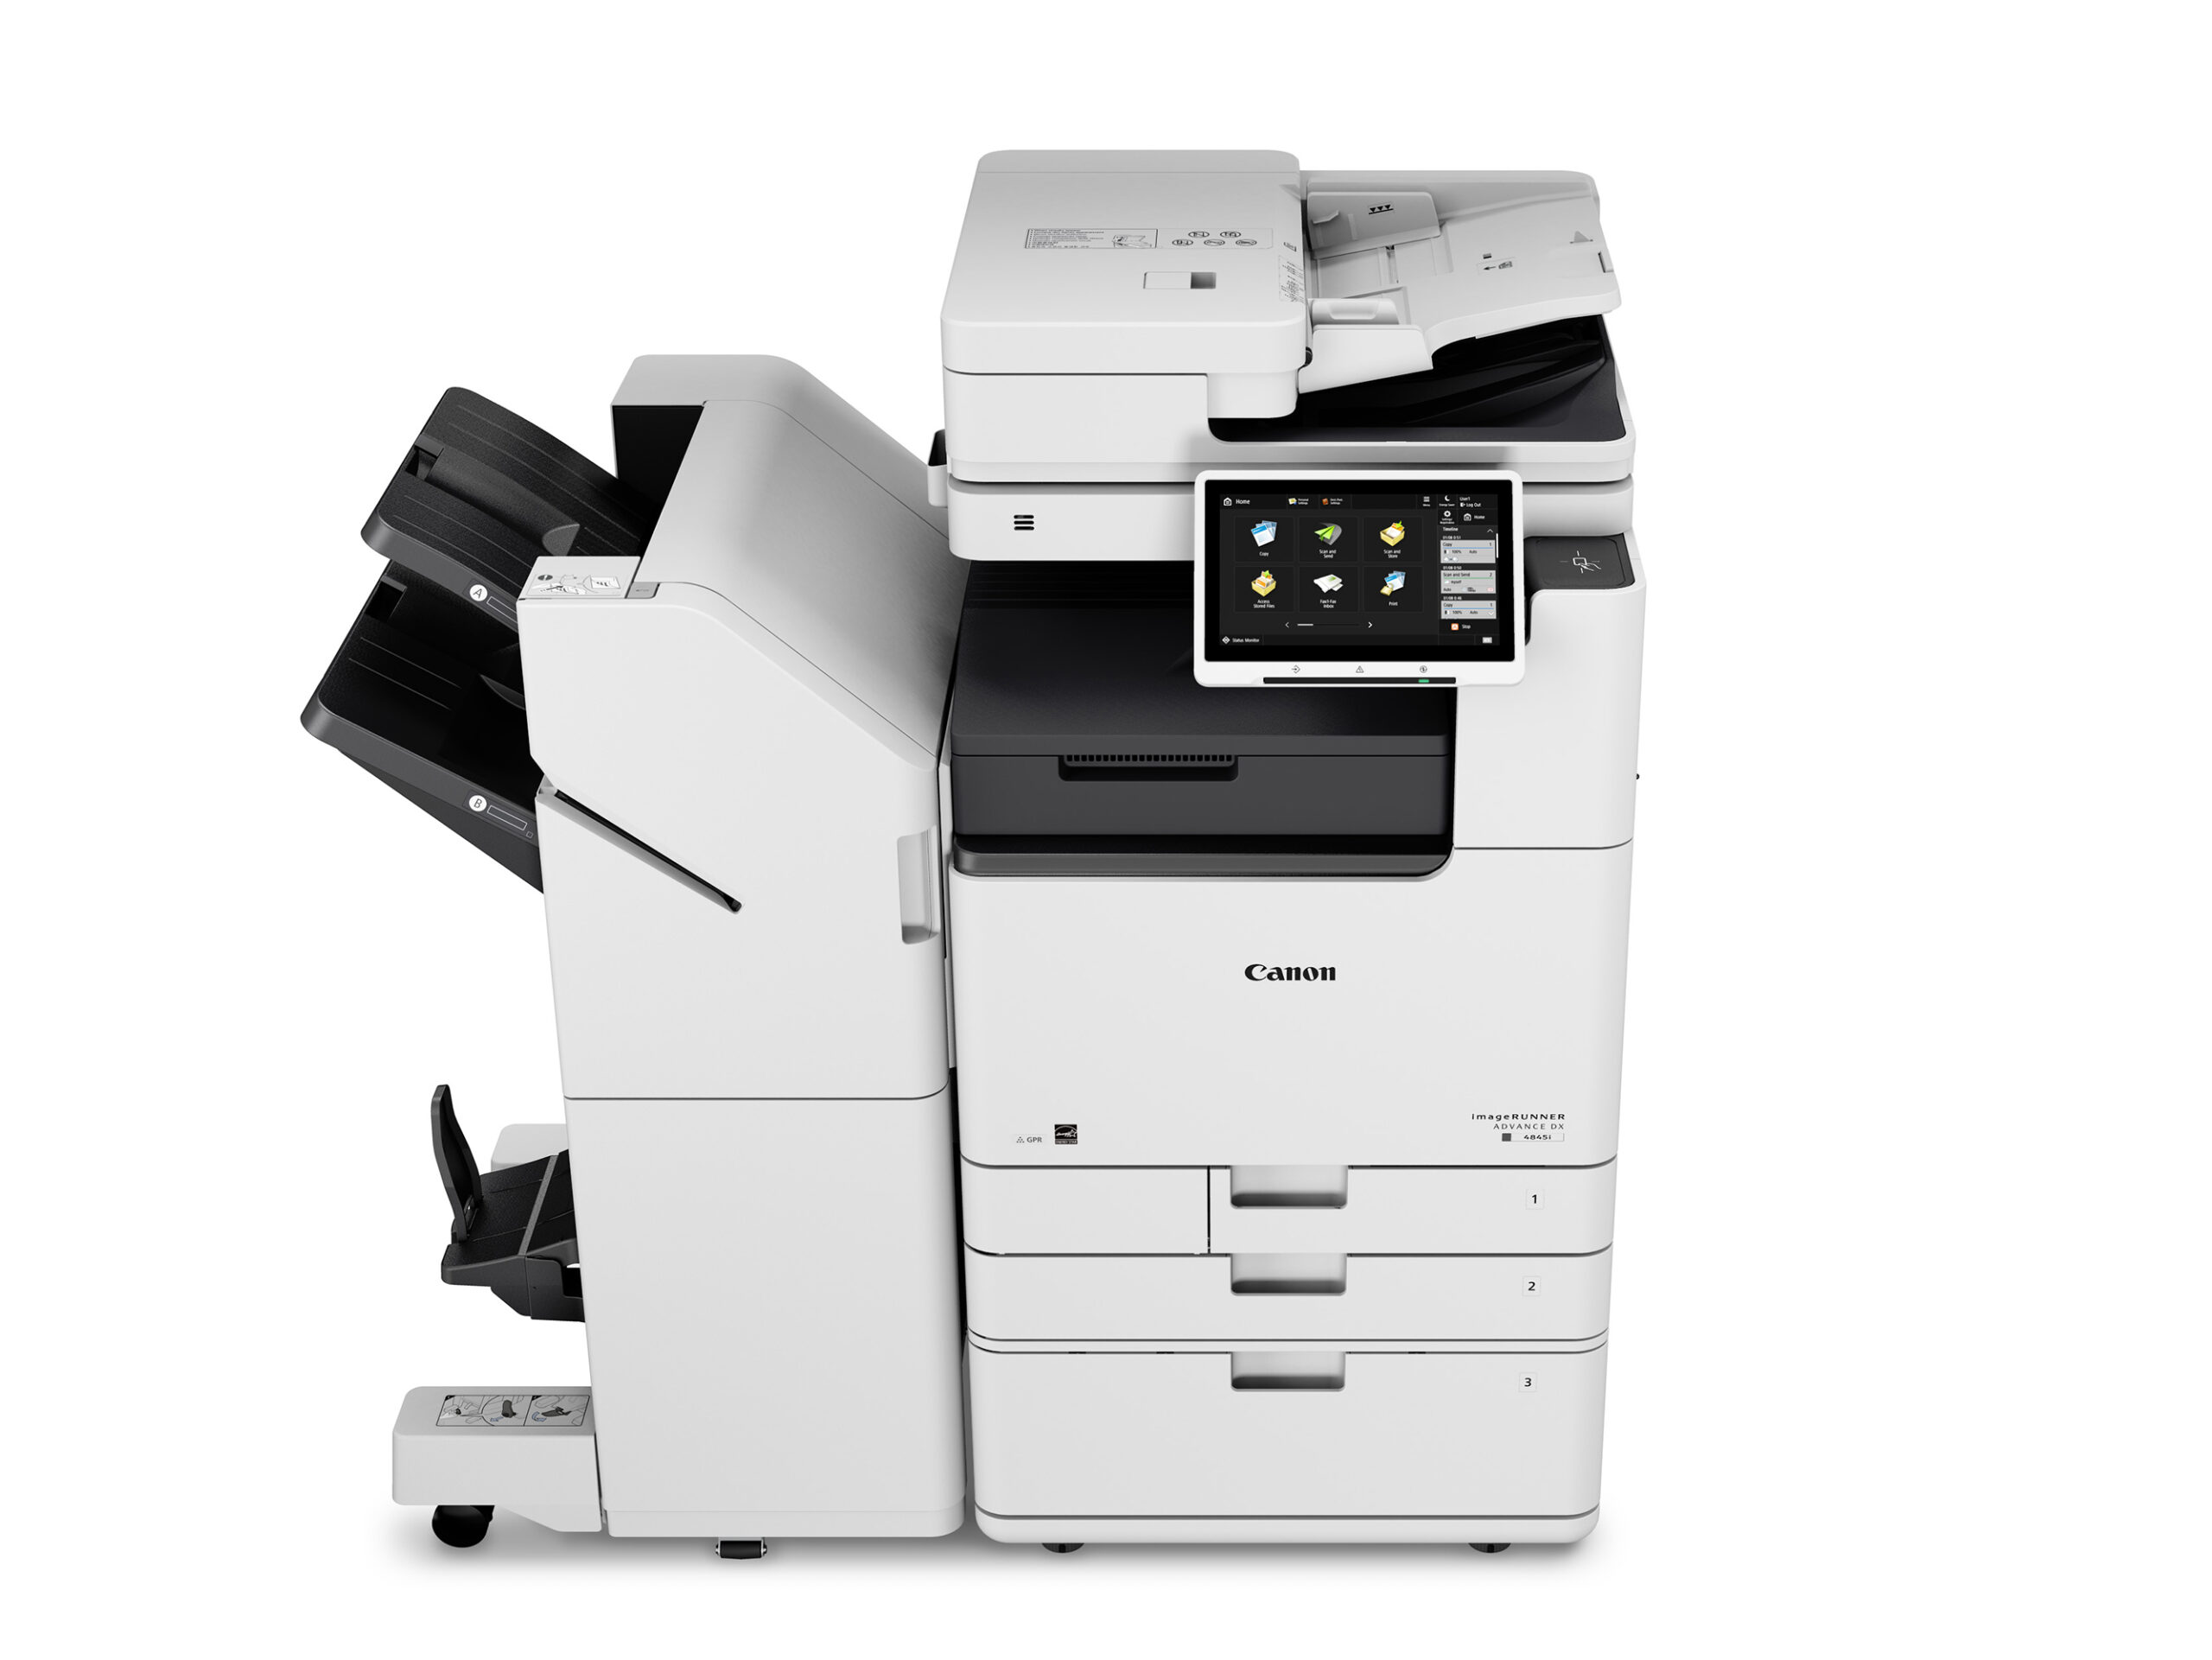 Canon U.S.A. Announces Availability of imageRUNNER ADVANCE DX 4800 Series